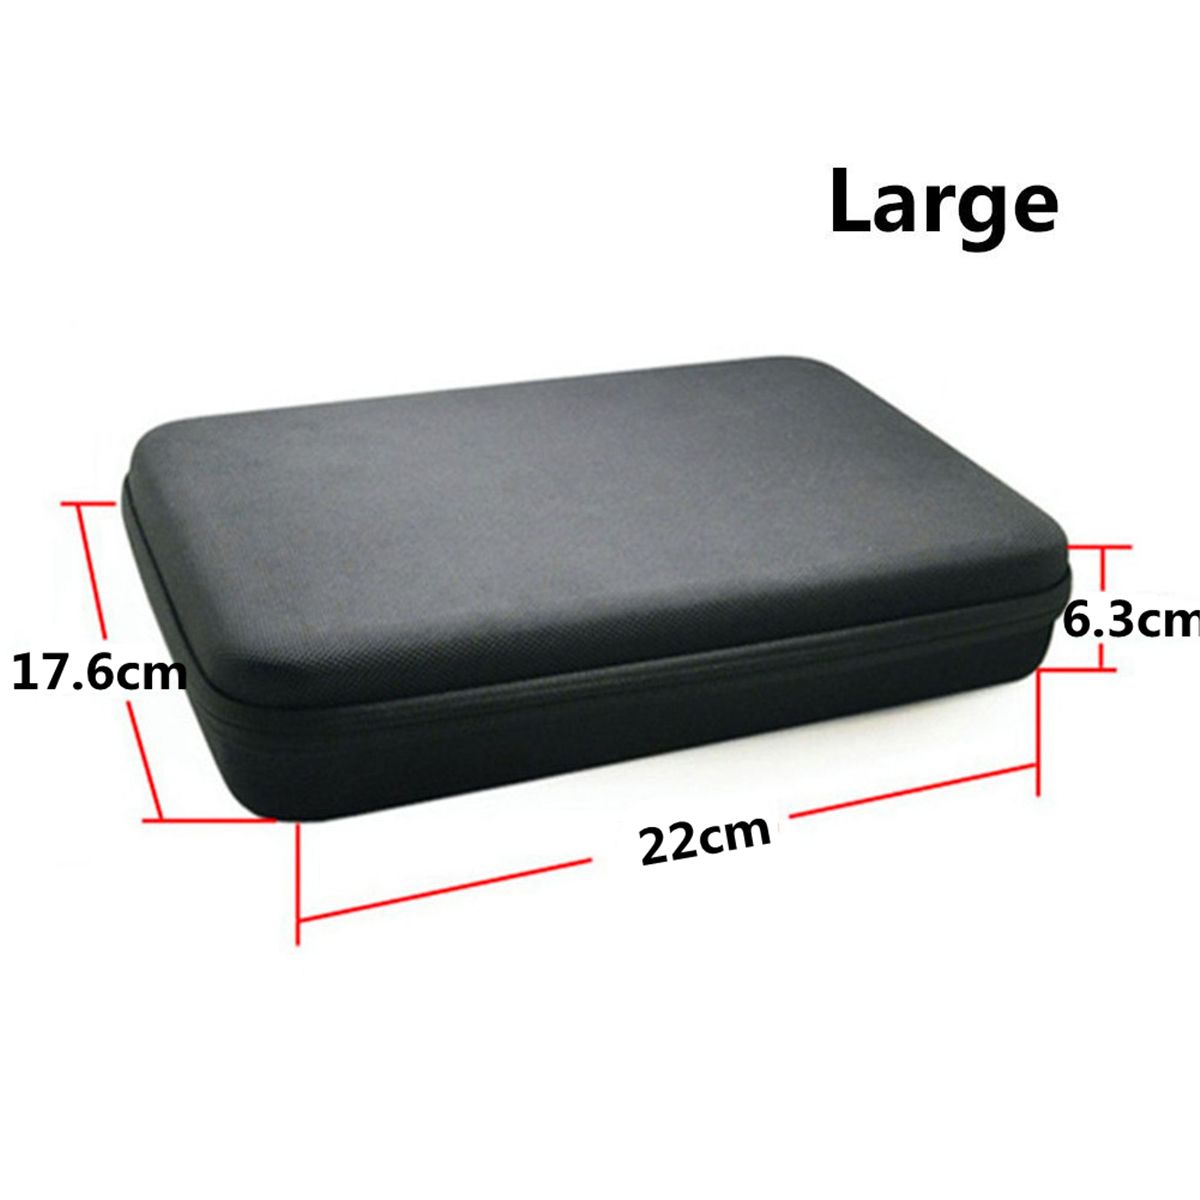 Large-Size-Travel-Protective-Actioncamera-Accessories-Storage-Bag-Carry-Case-1130364